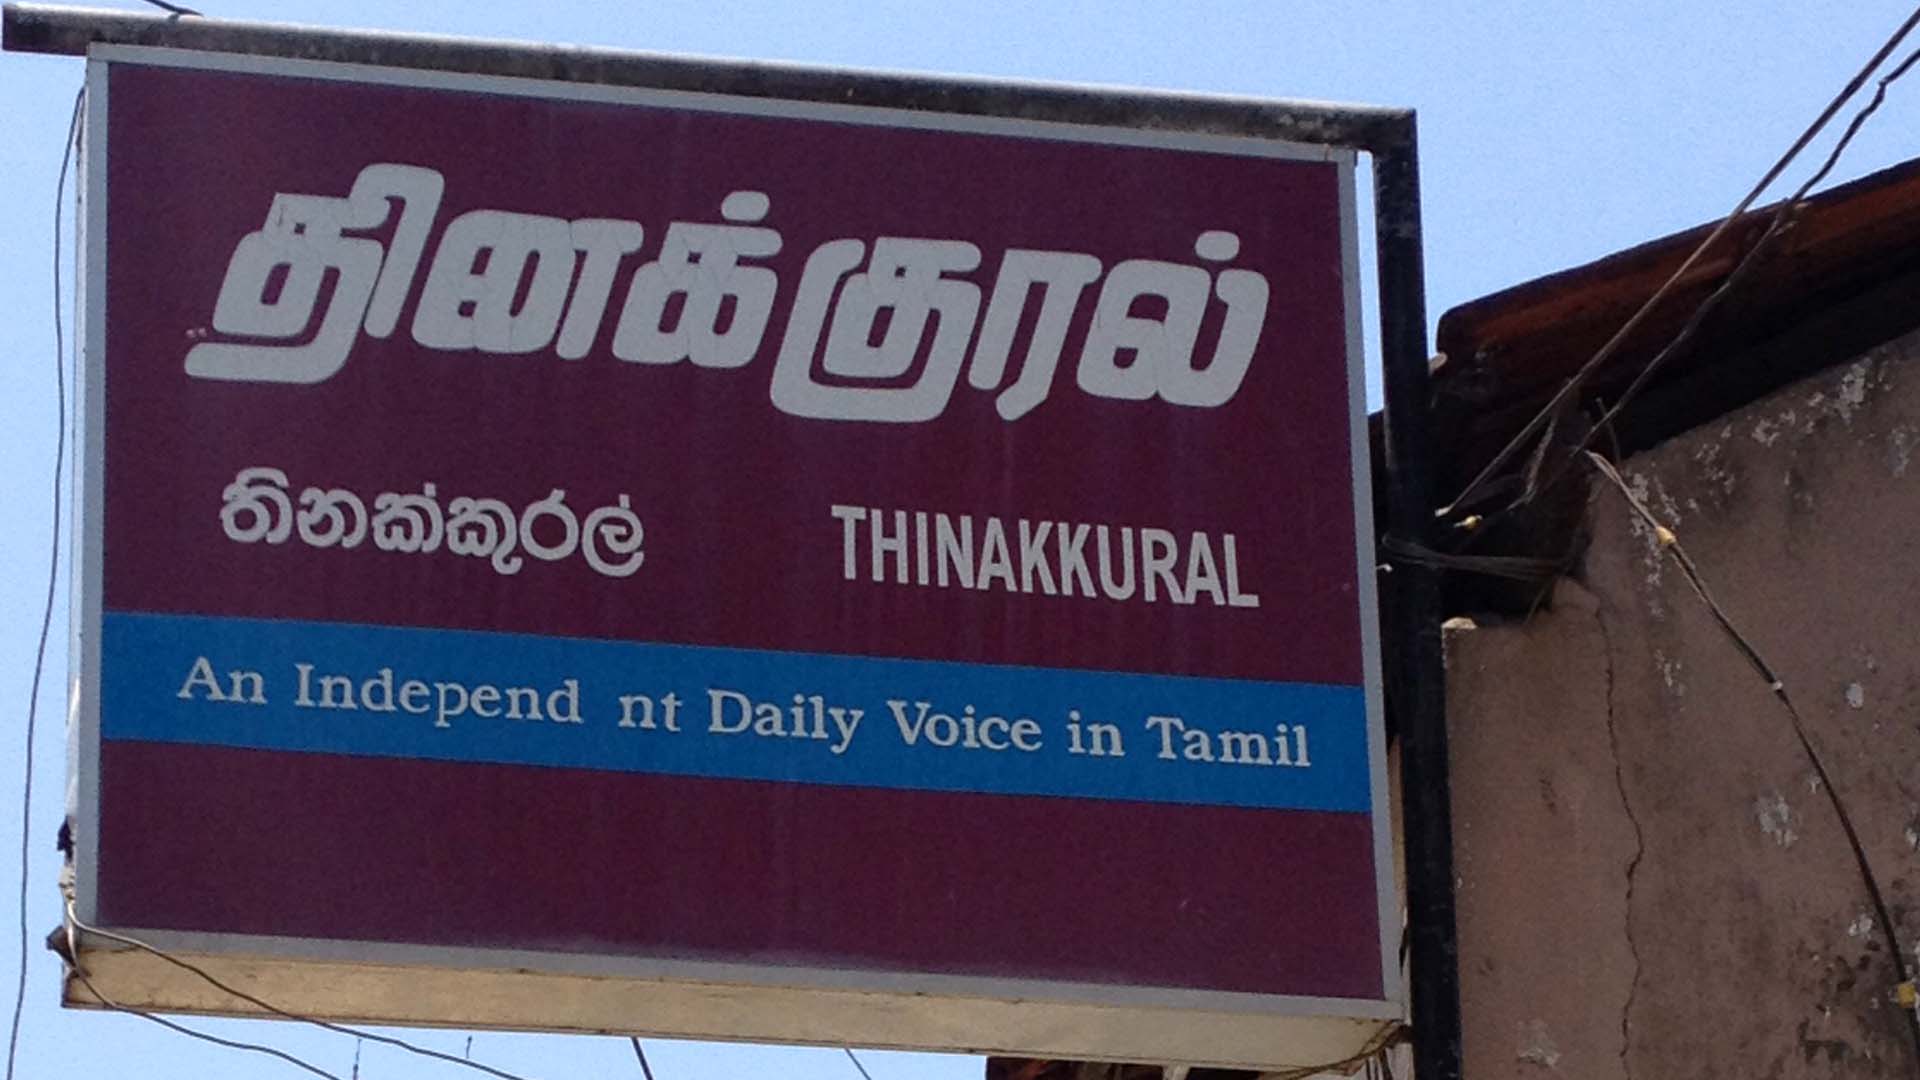 Print media remains highly influential in the Tamil community, with four main dailies and several weeklies